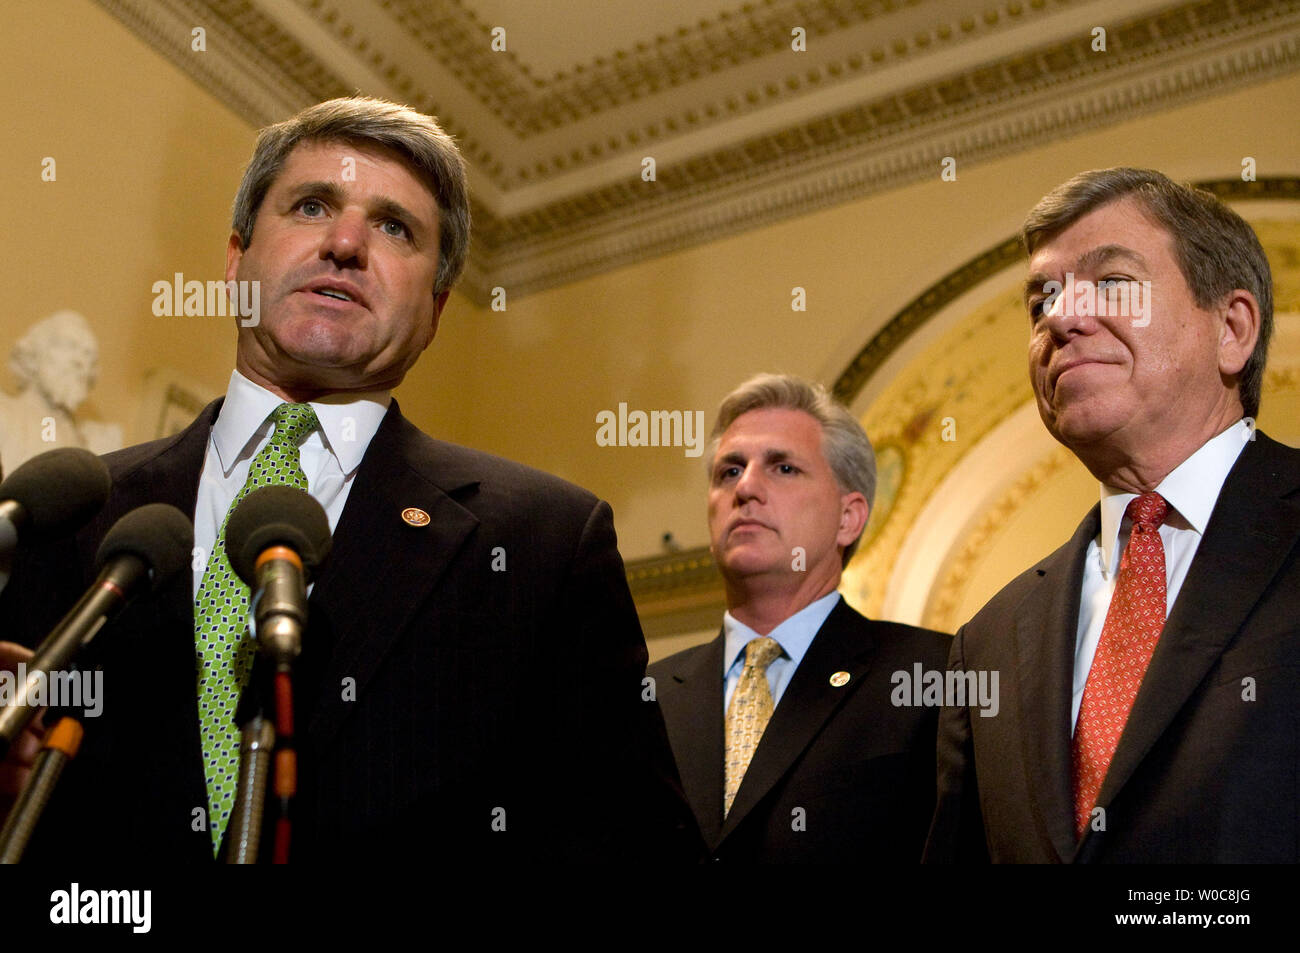 Rep. Kevin McCarthy, R-CA, (C) and House Minority Whip Roy Blunt, R-MO, (R) look on as Rep. Michael McCaul, R-TX, (L) speaks during a news conference on Capitol Hill in Washington on August 7, 2008.  The House Republicans are calling on Speaker Nancy Pelosi, D-CA, to reconvene the chamber and vote on the American Energy Act, a Republican bill designed to address America's dependence on foreign oil.  (UPI Photo/Patrick D. McDermott) Stock Photo